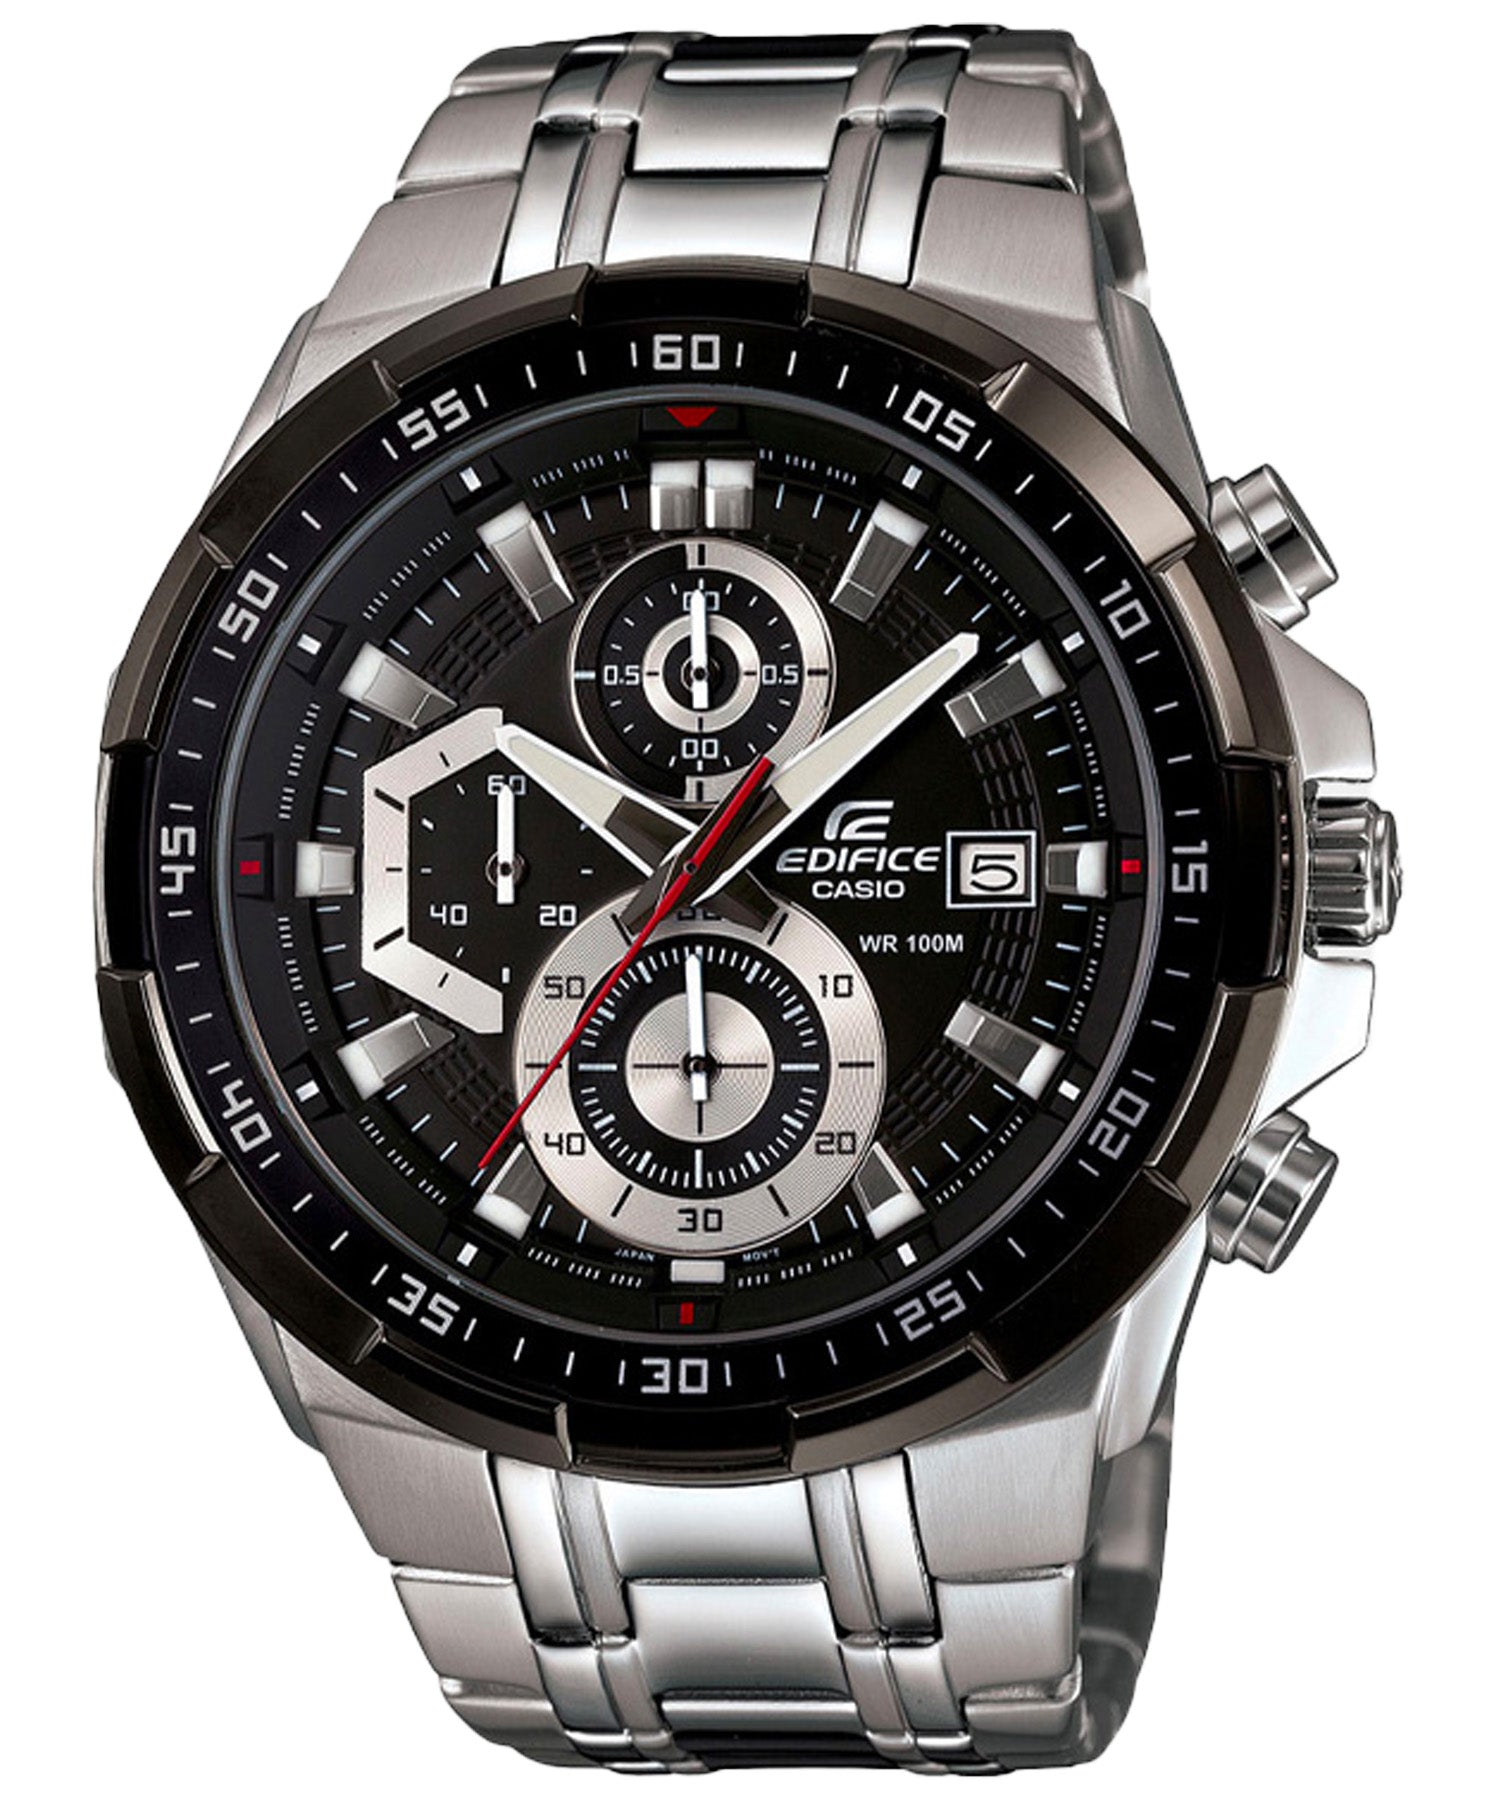 Edifice Men's Watch Chronograph, Black Dial Silver Stainless Band, EFR-539D-1AVUDF